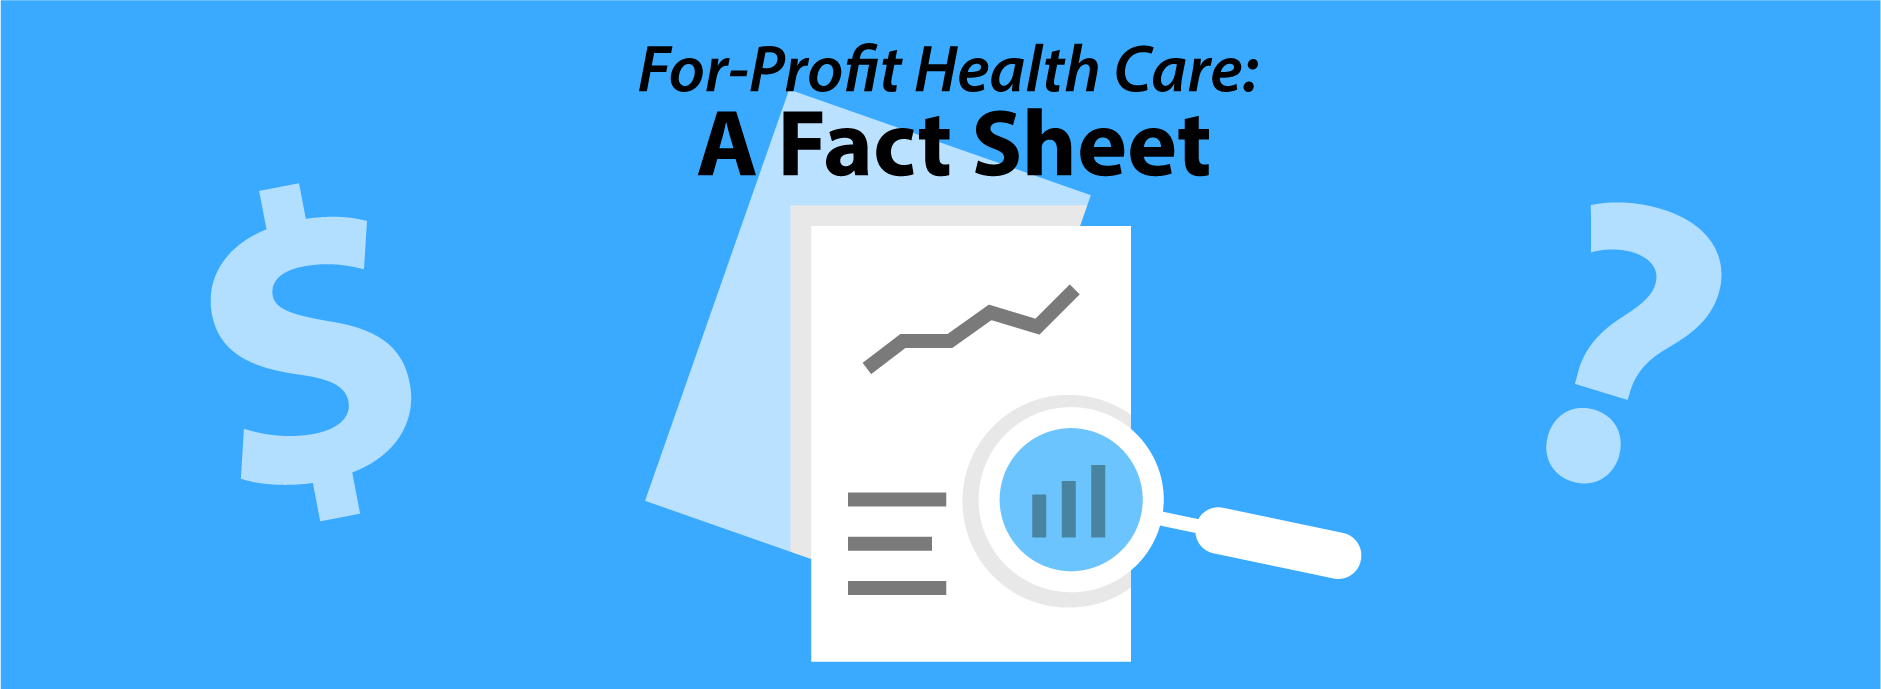 For-Profit Health Care: A Fact Sheet